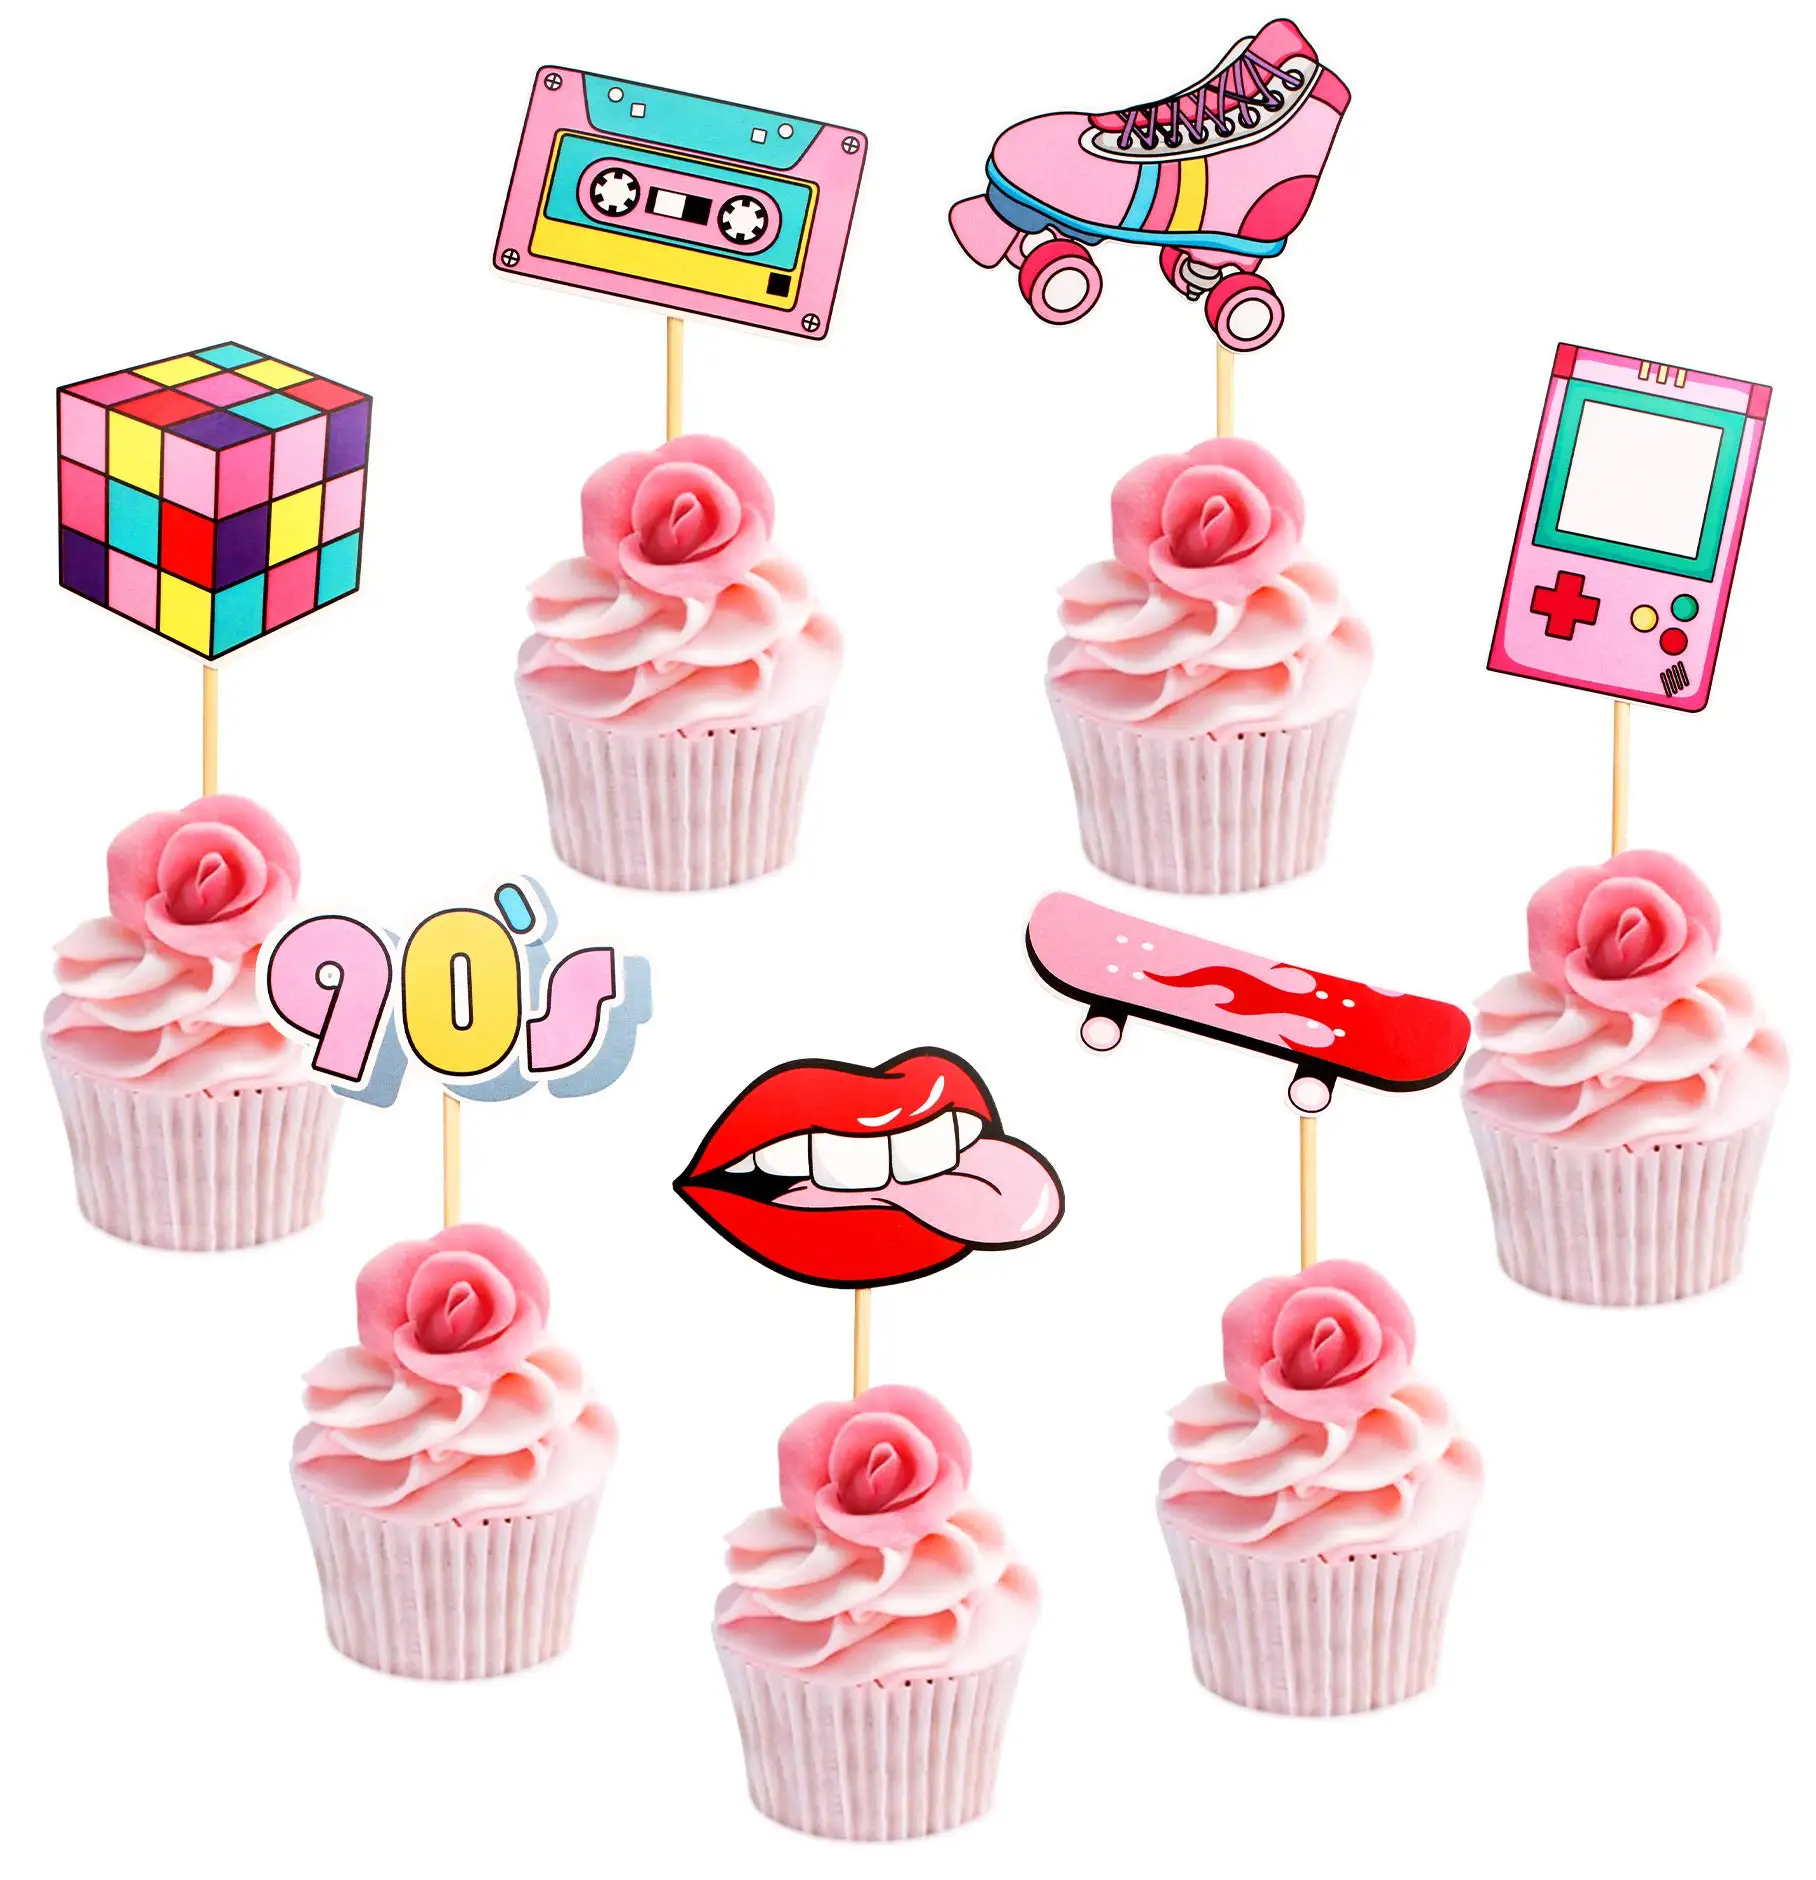 21Pcs 80s 90s Themed Cupcake Toppers Dessert Cupcake Toppers Birthday Supplies Throwback Party Favors Decorations mickey mouse minnie cupcake toppers pick party supplies kids birthday party wedding cake flag decorations paper cupcake cake